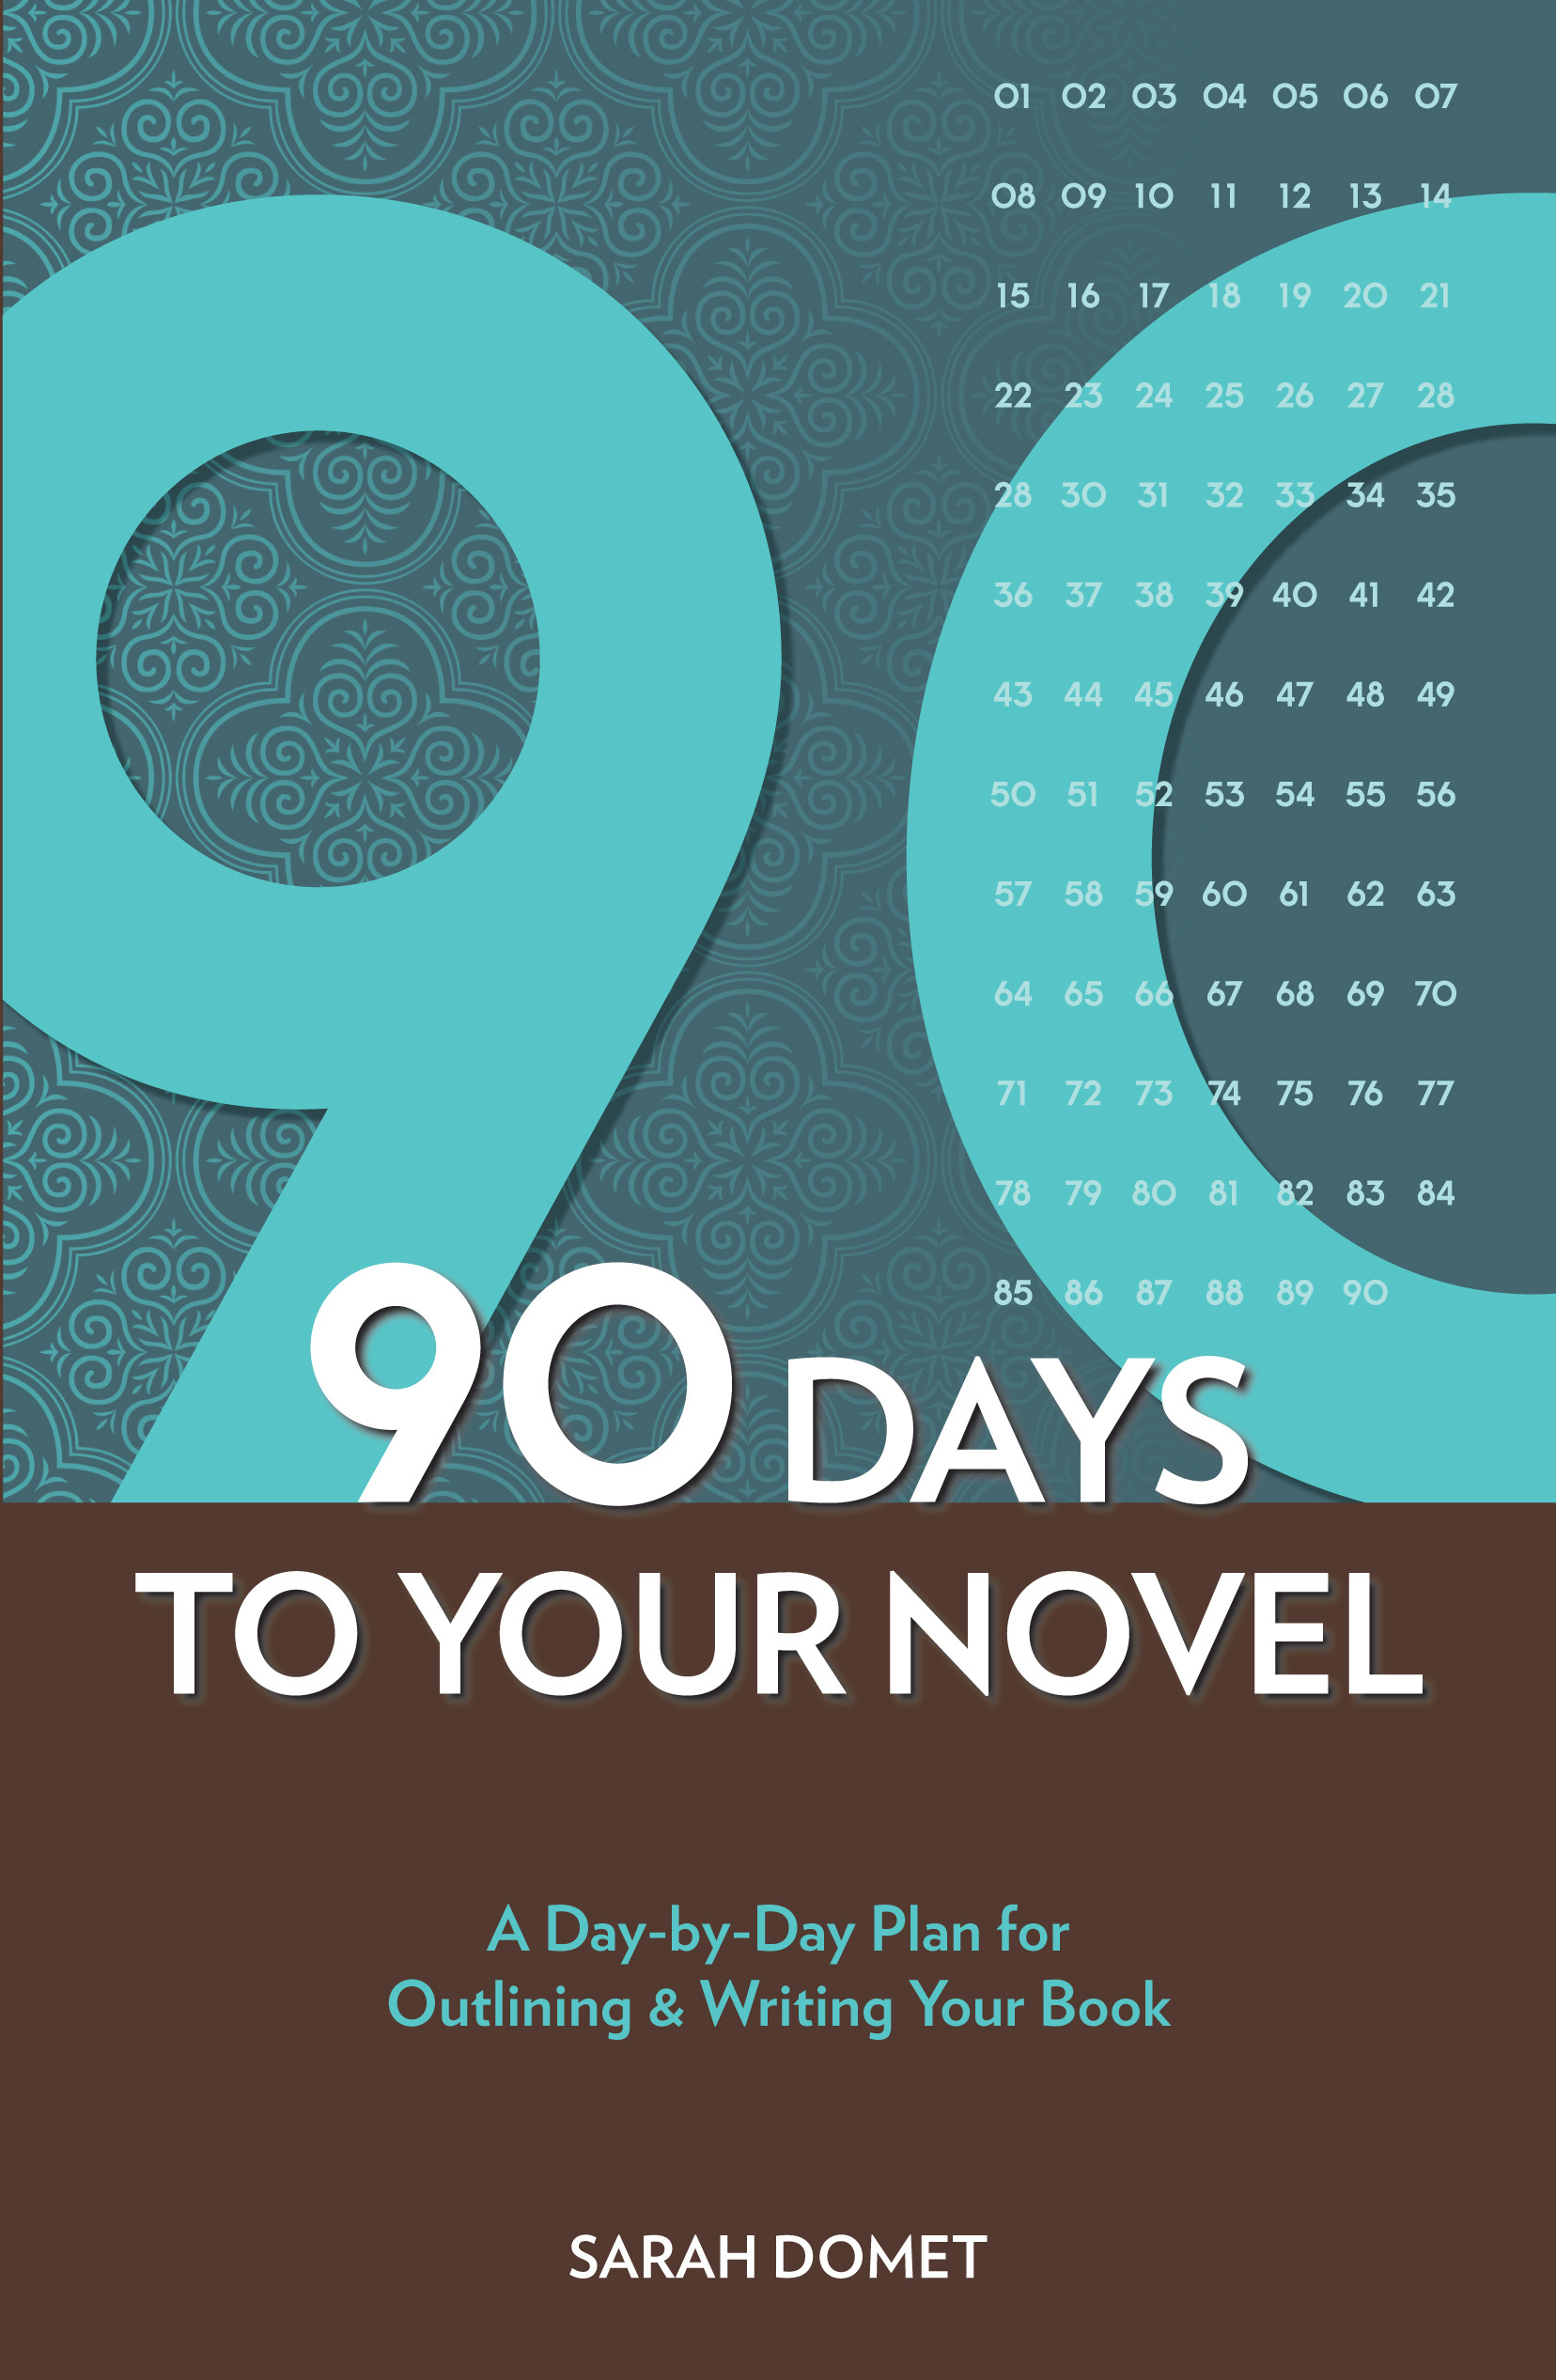 90 Days To Your Novel - 10-14.99